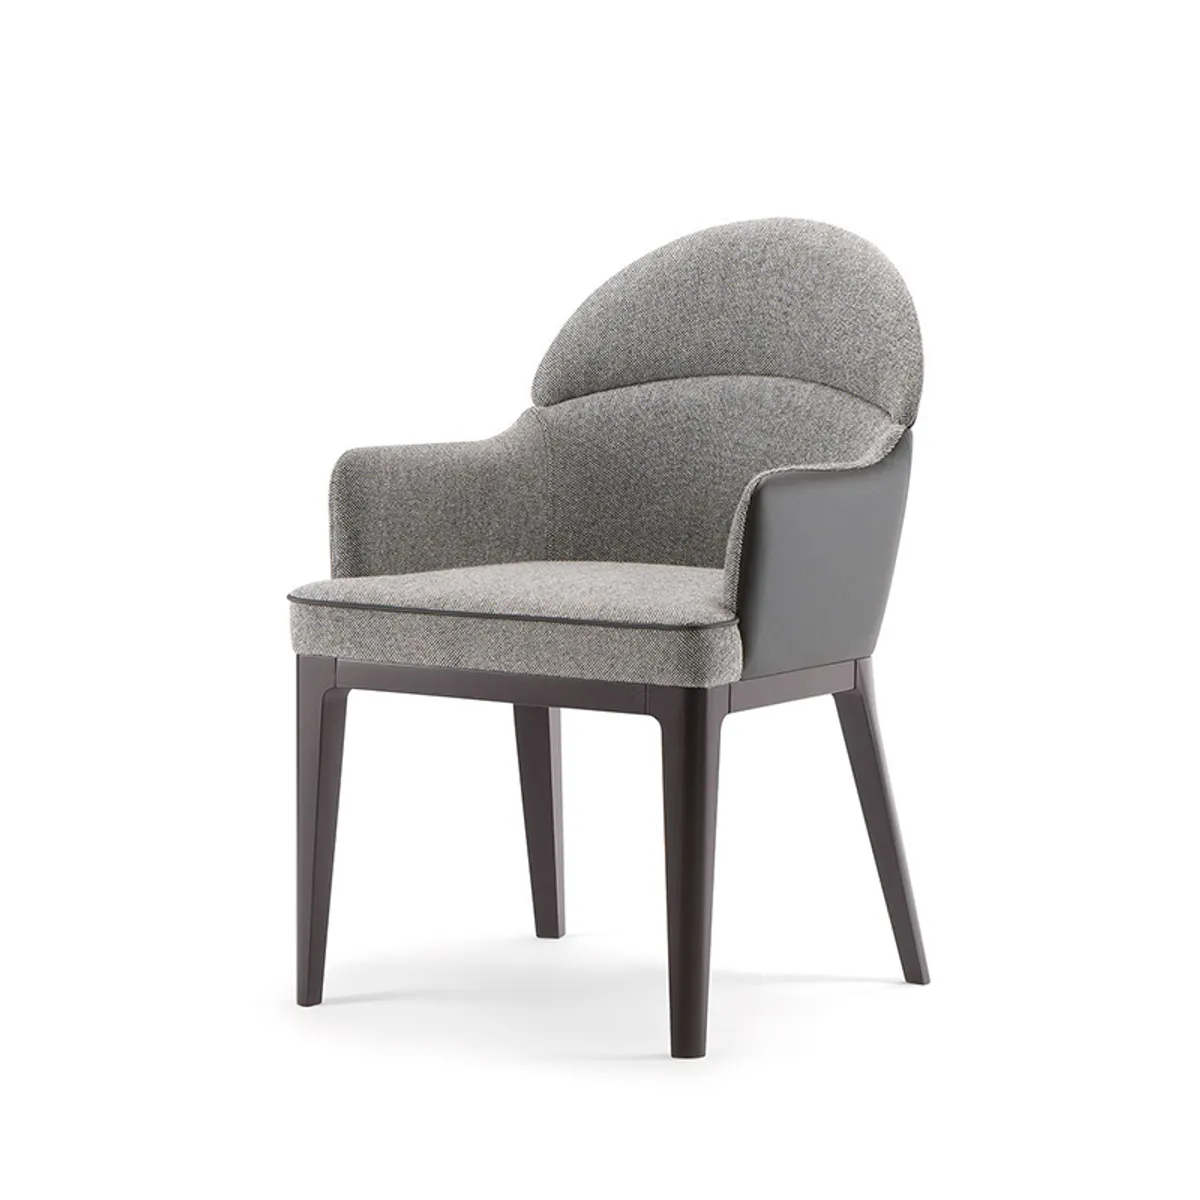 Dallas Armchair Contemporary Upholstered Furniture Insideoutcontracts 054